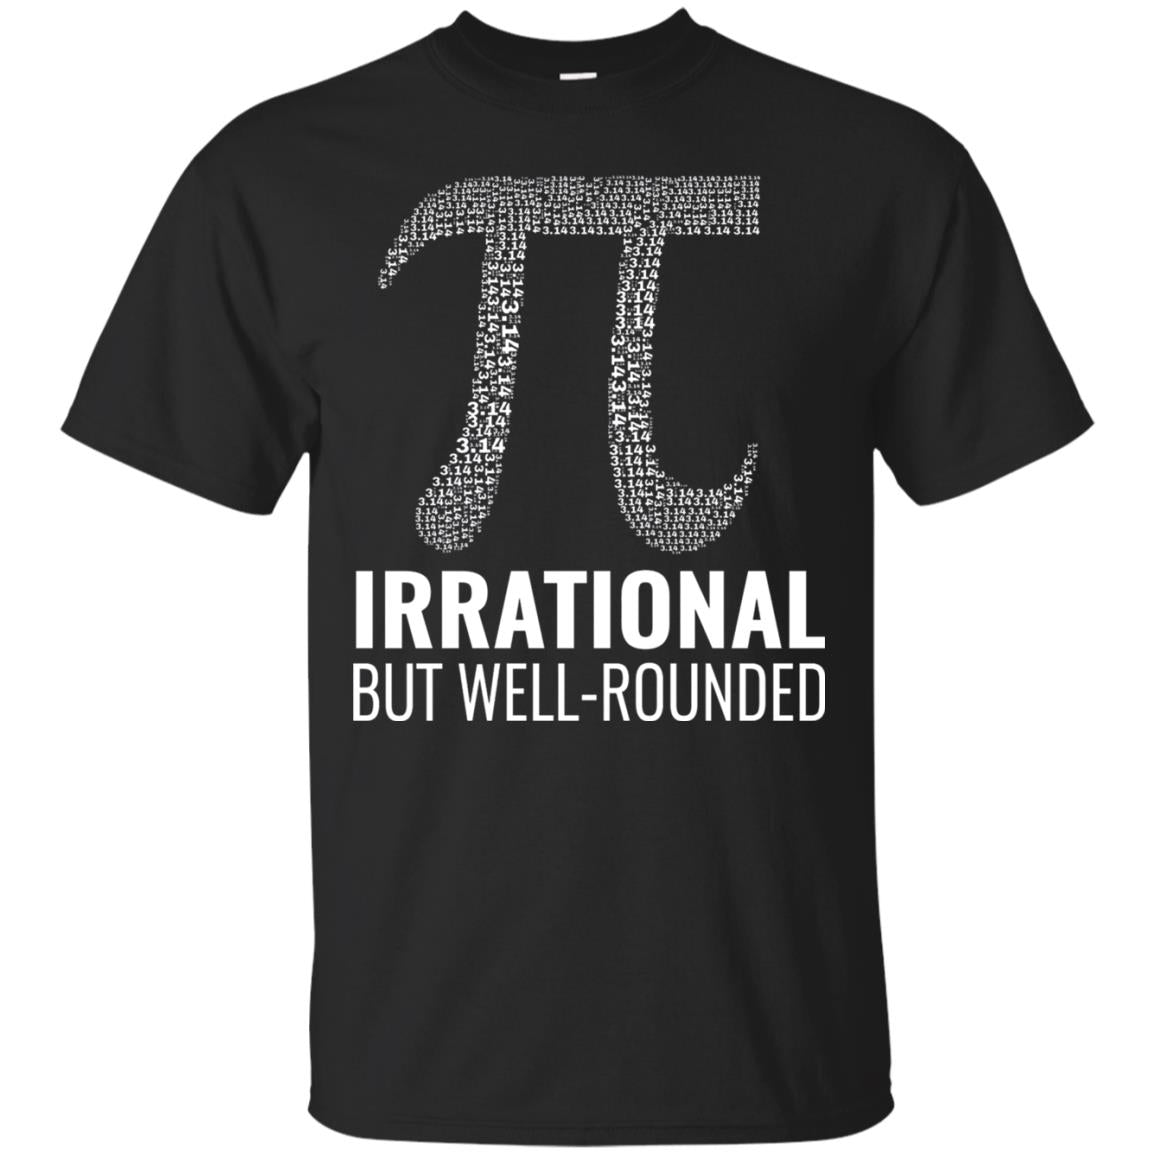 Funny Pi Shirt Irrational But Well Rounded